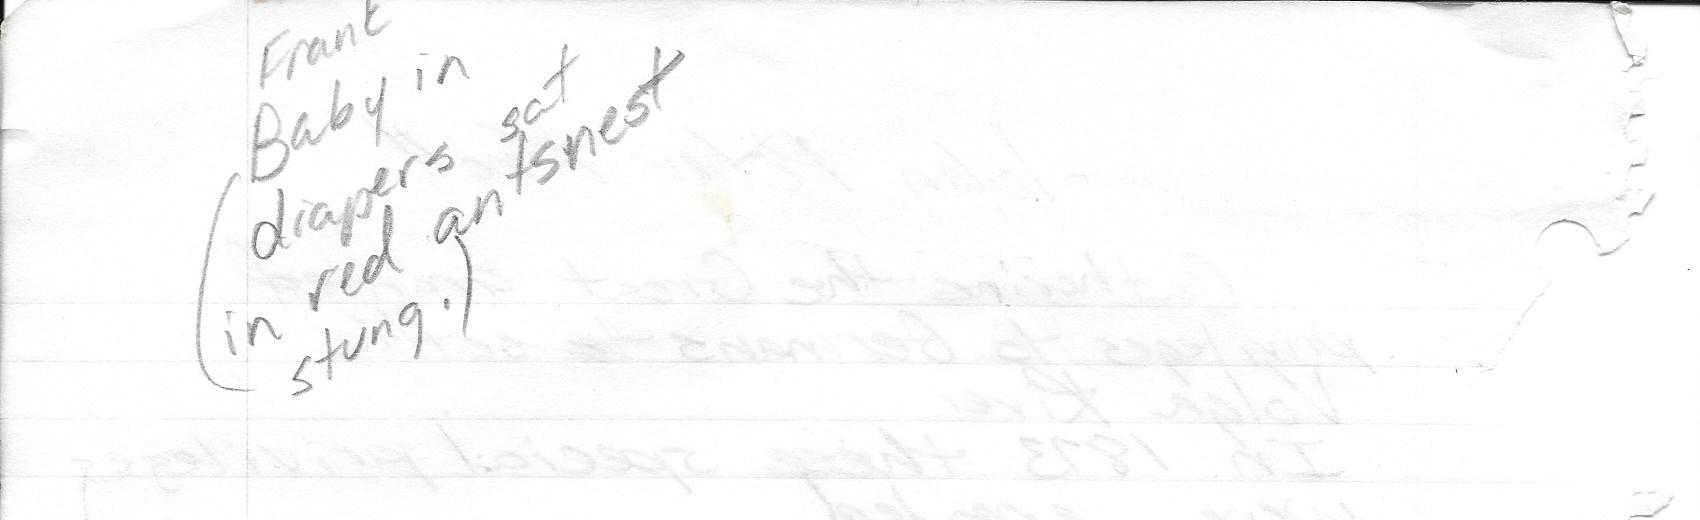 Part of a page with a final handwritten note about Frank Boyd